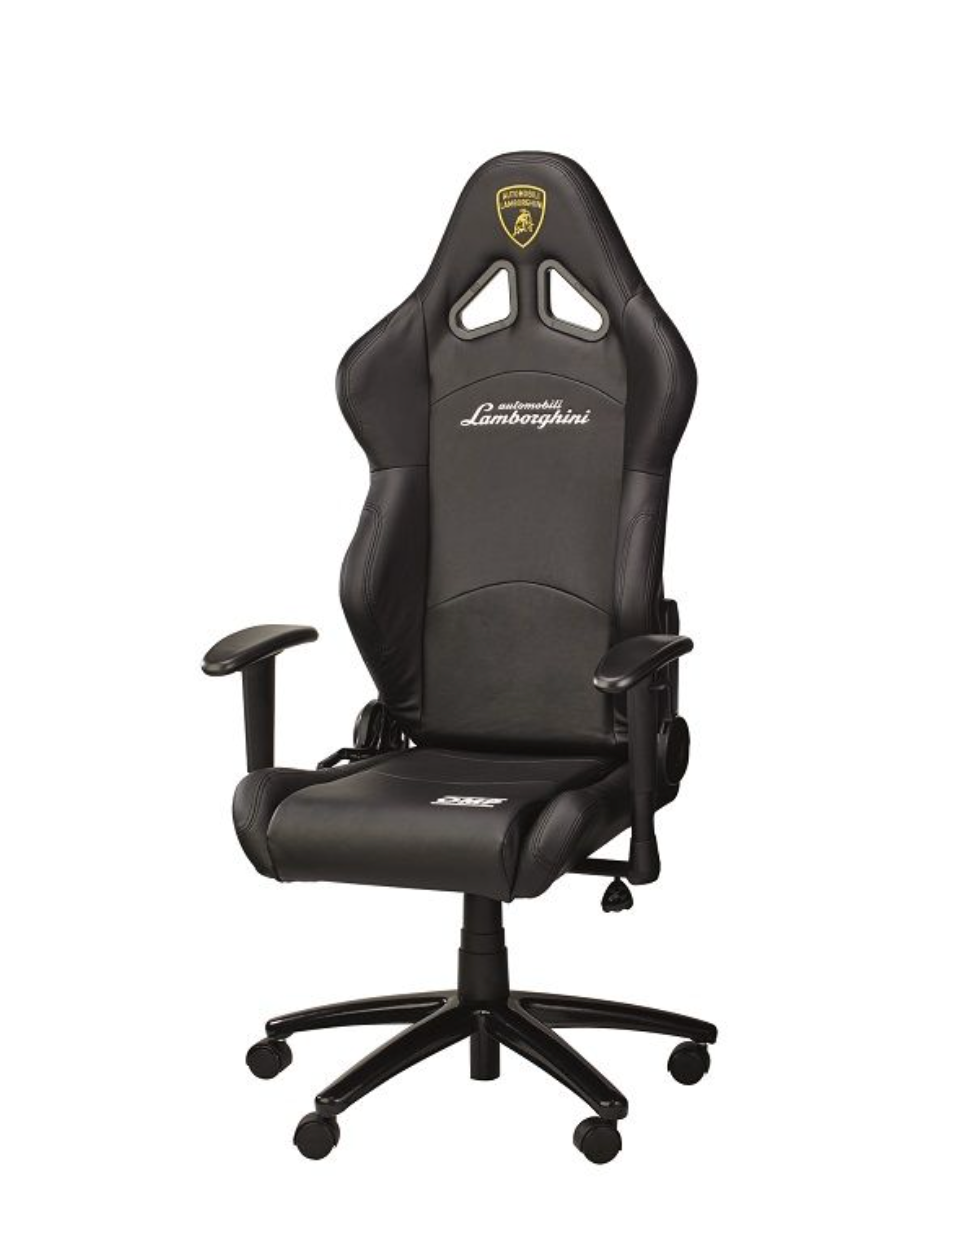 OMP OFFICIAL LICENSED LAMBORGHINI OFFICE CHAIR